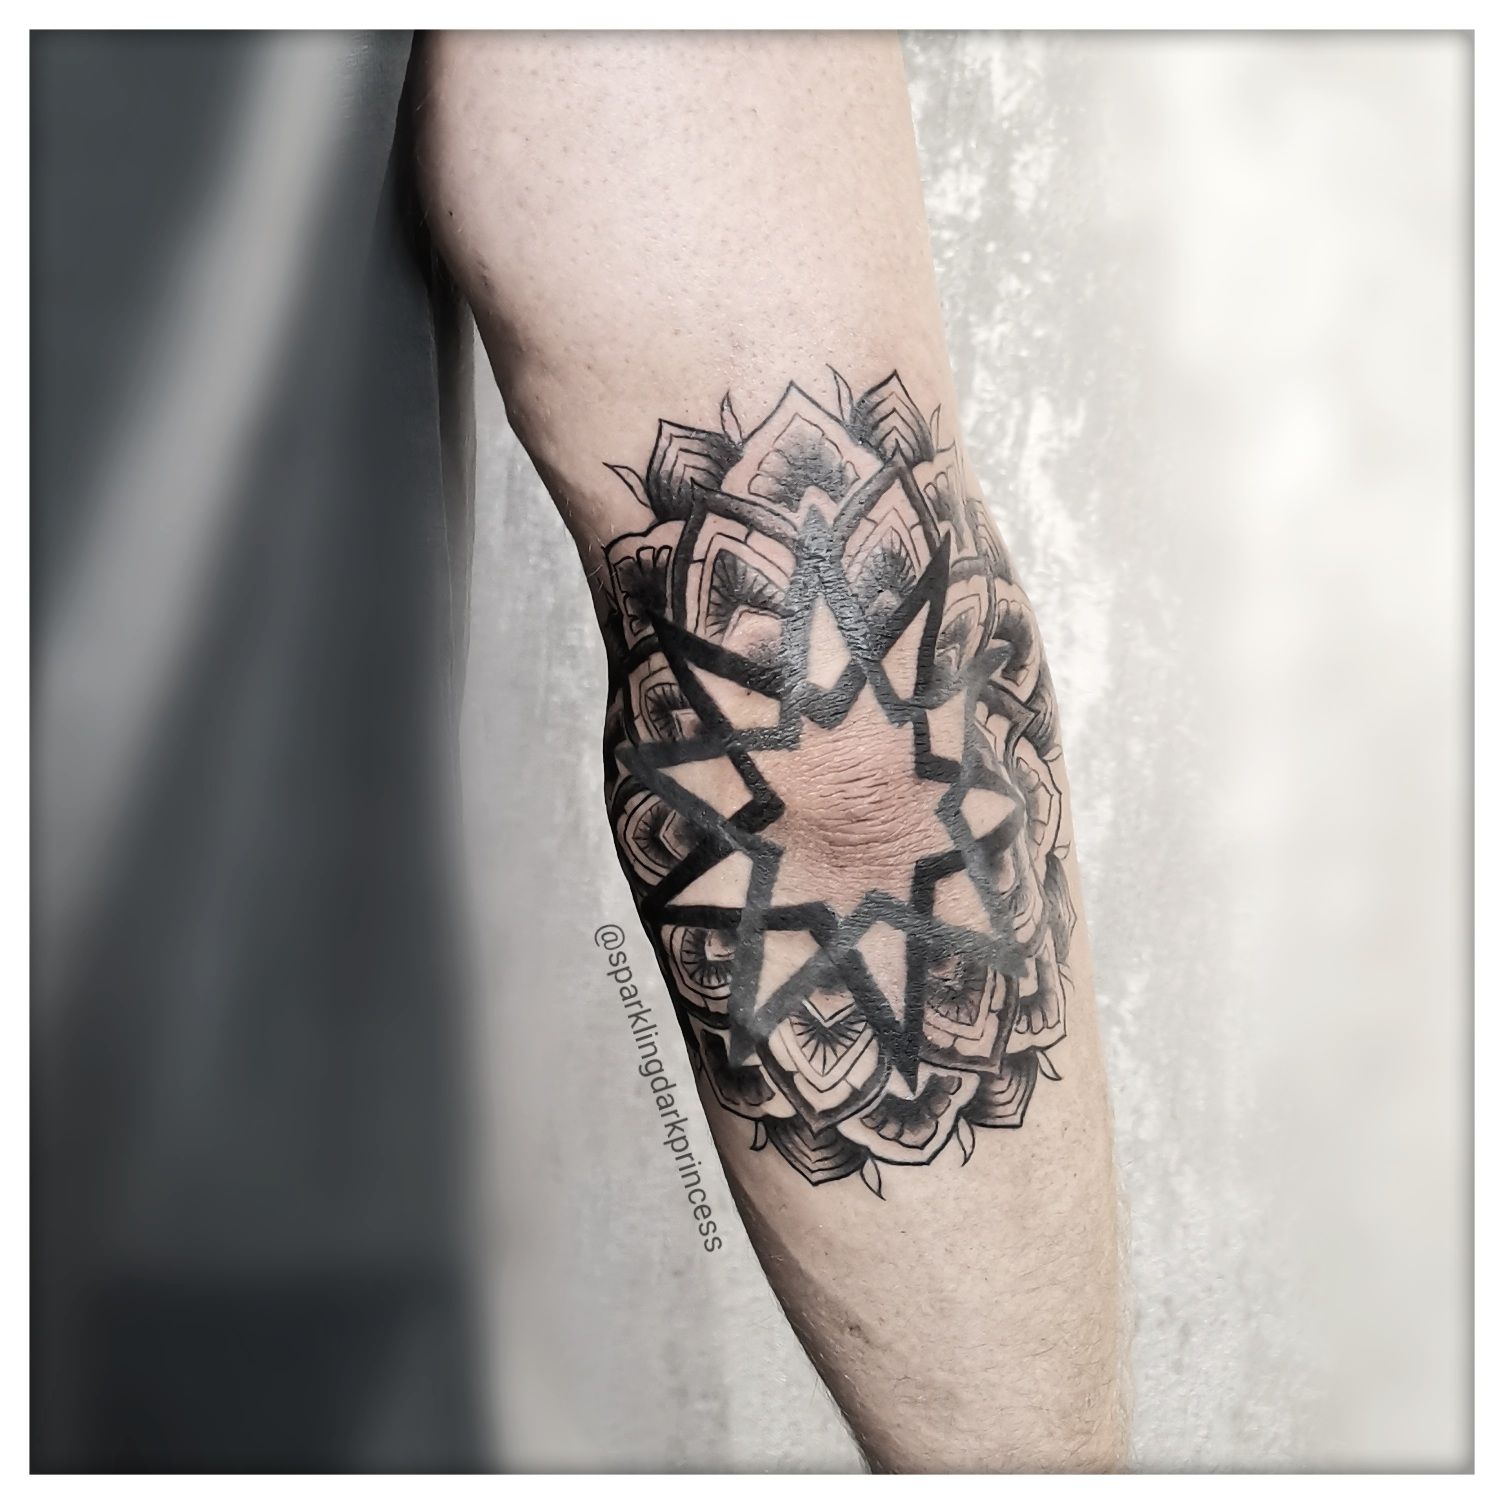 Elbow and fill for chantelwilkie_fitness Thank you! studioxiiigallery ⋆  Studio XIII Gallery